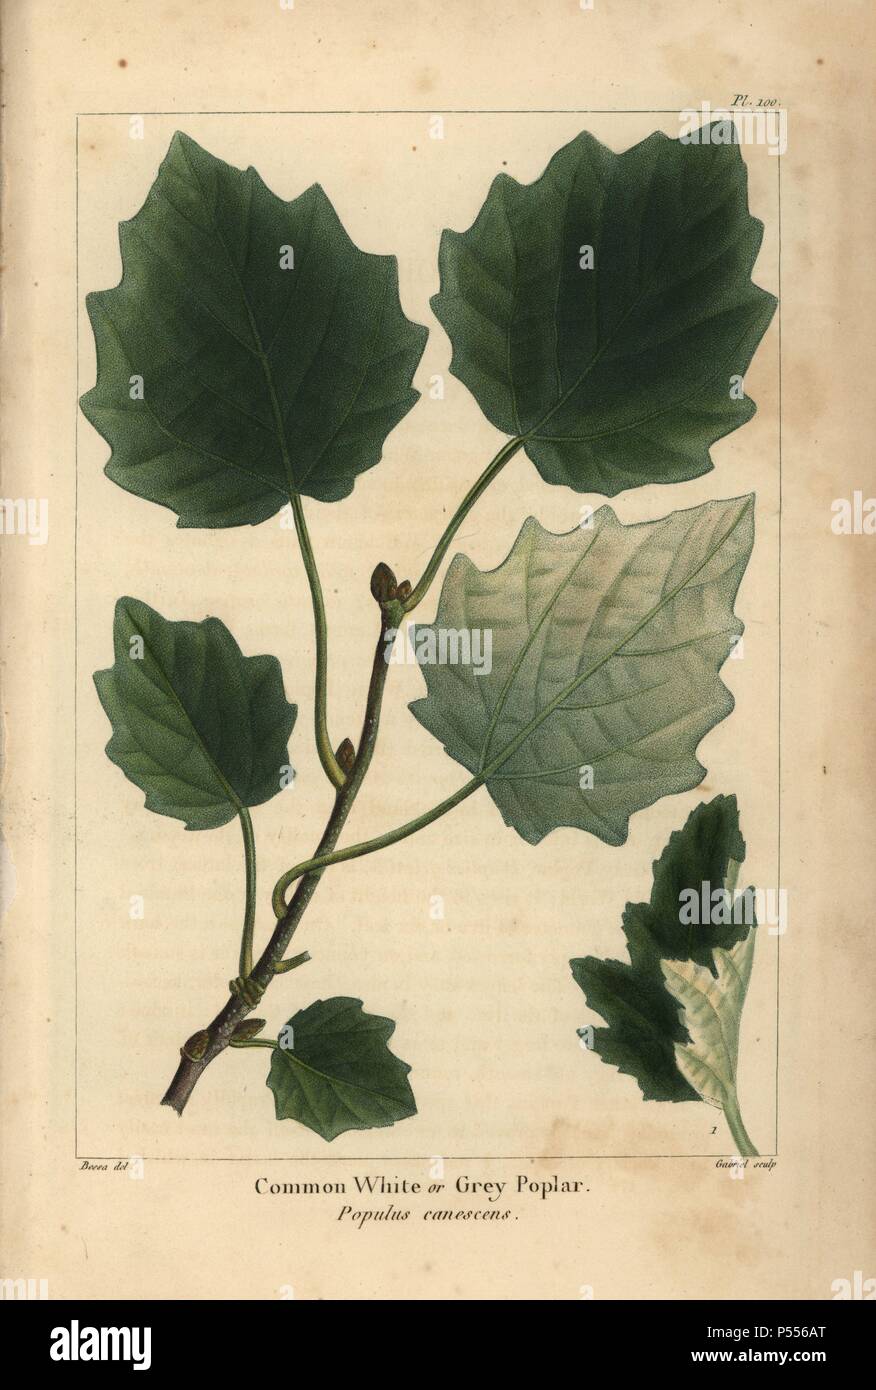 Leaf, branch and sprout of the Common white or grey poplar, Populus canescens. Handcolored stipple engraving from a botanical illustration by Pancrace Bessa, engraved on copper by Gabriel, from Francois Andre Michaux's "North American Sylva," Philadelphia, 1857. French botanist Michaux (1770-1855) explored America and Canada in 1785 cataloging its native trees. Stock Photo